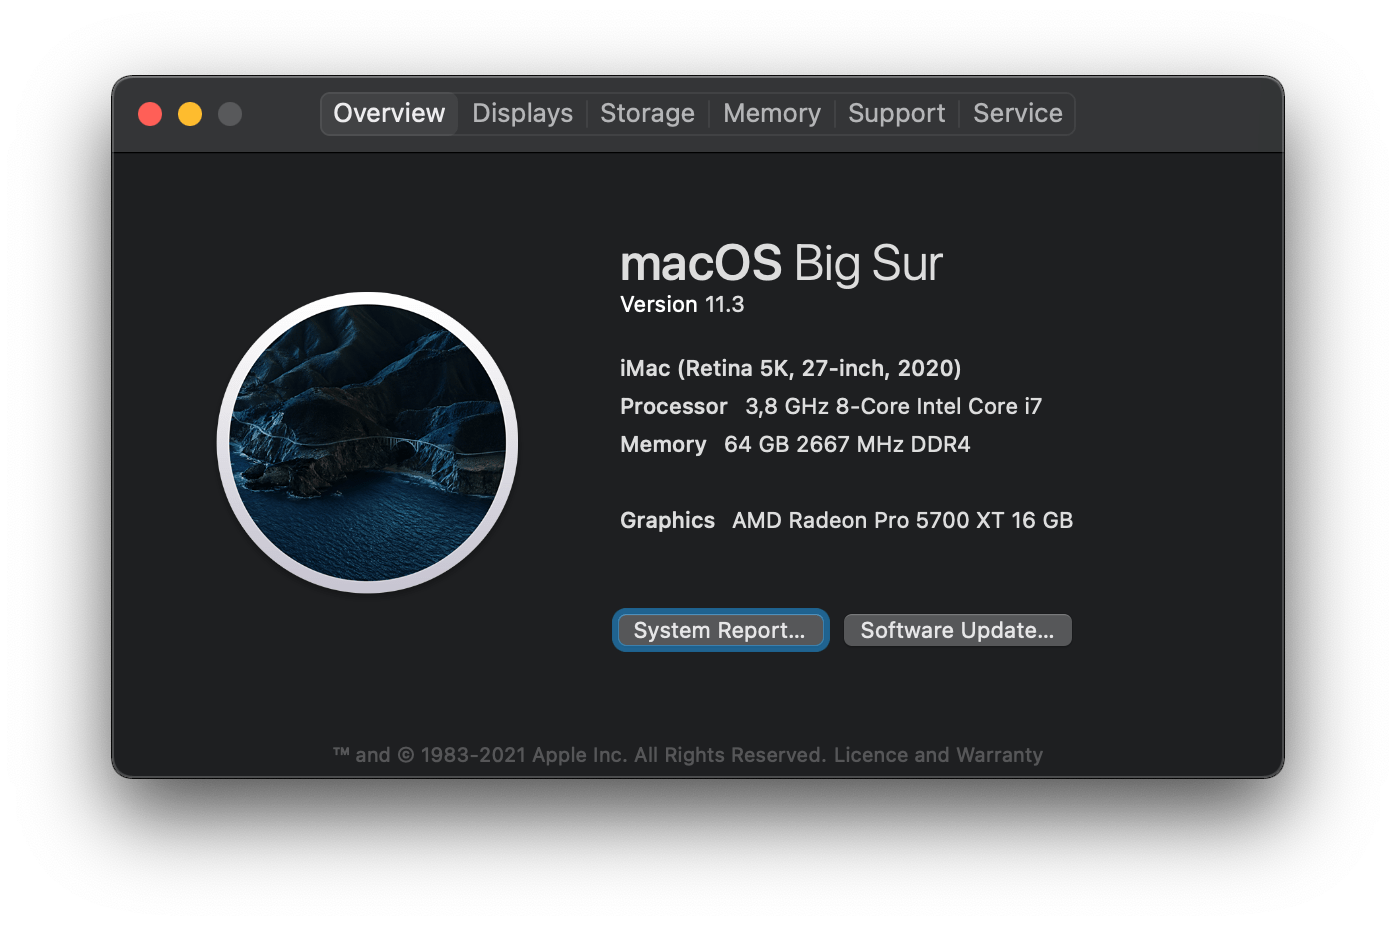 AboutmyMac-2990aed1-d742-4529-85ef-4f9e3d5c567f-1976735503.png